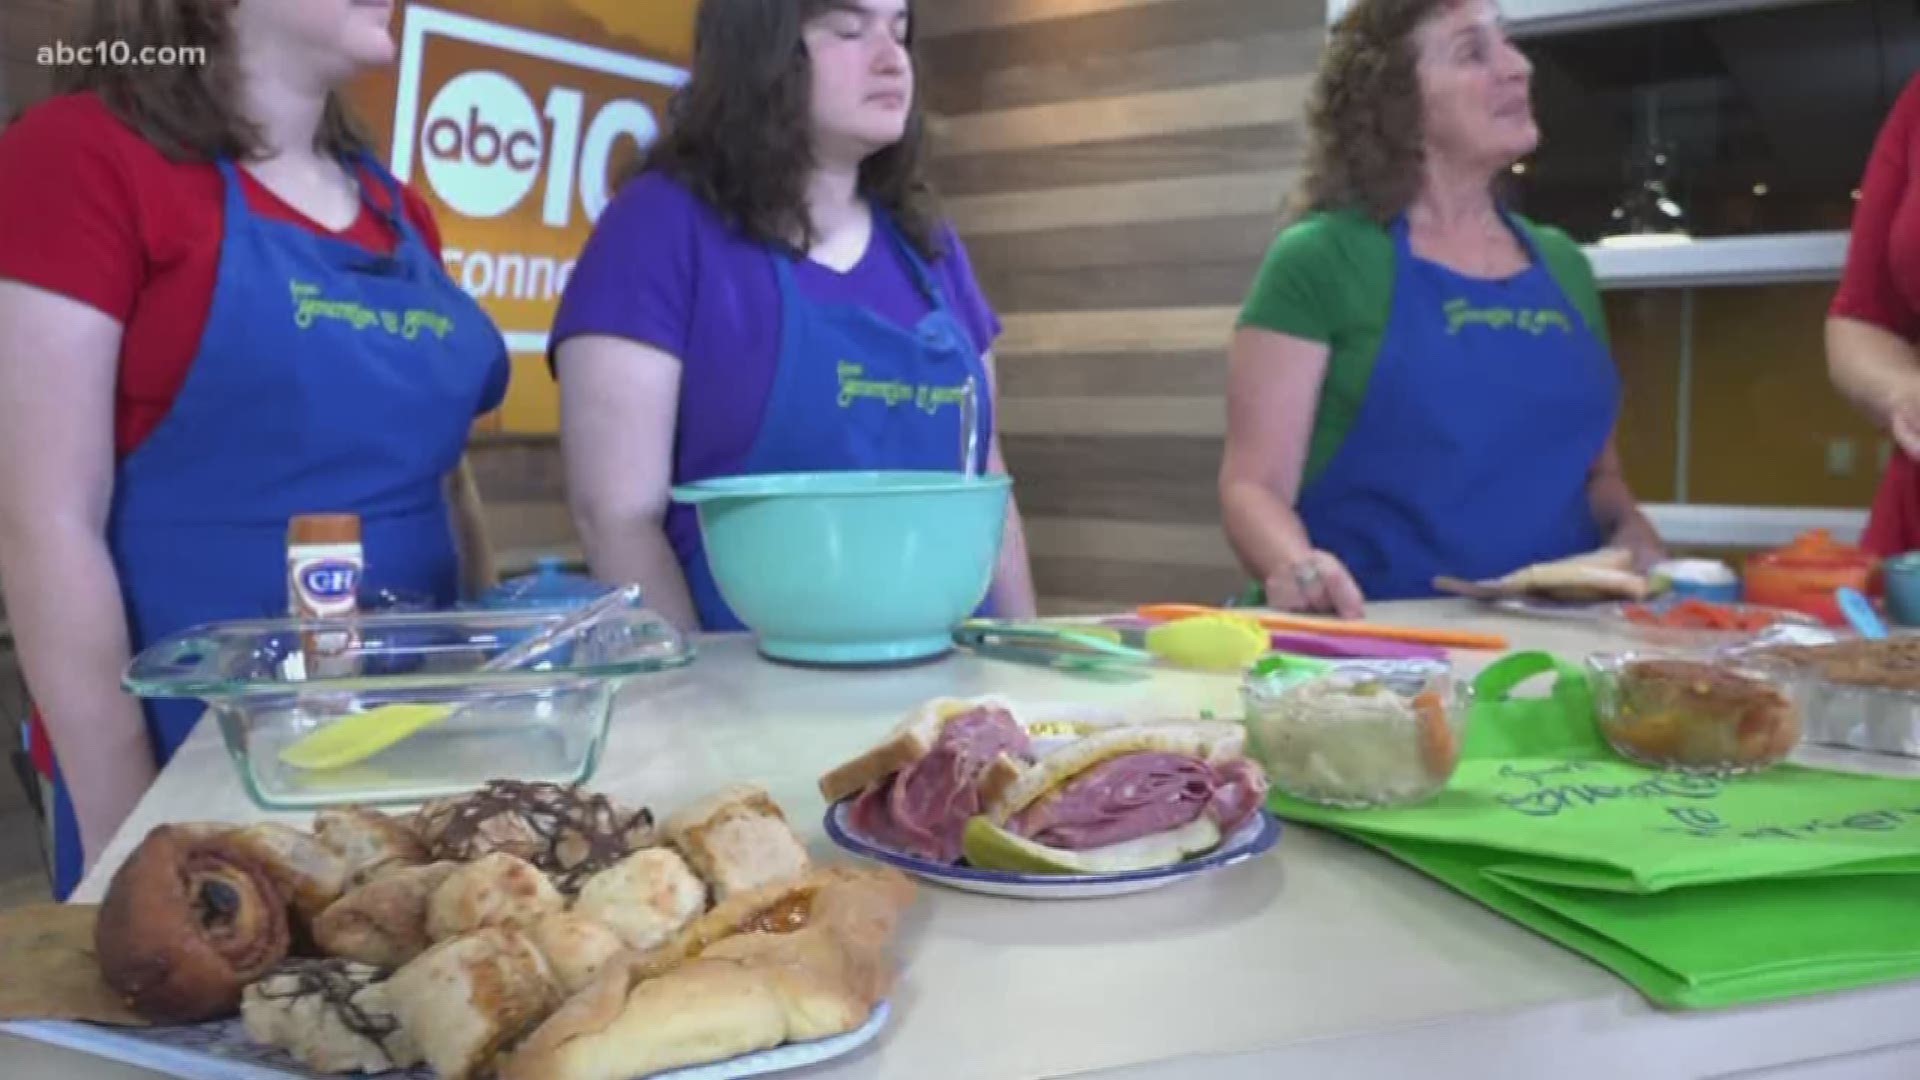 Jan Hessing, from Congregation Beth Shalom, shows off some delicious food and talks about the Sacramento Jewish Food Faire, happening Sunday, August 26, in Carmichael.